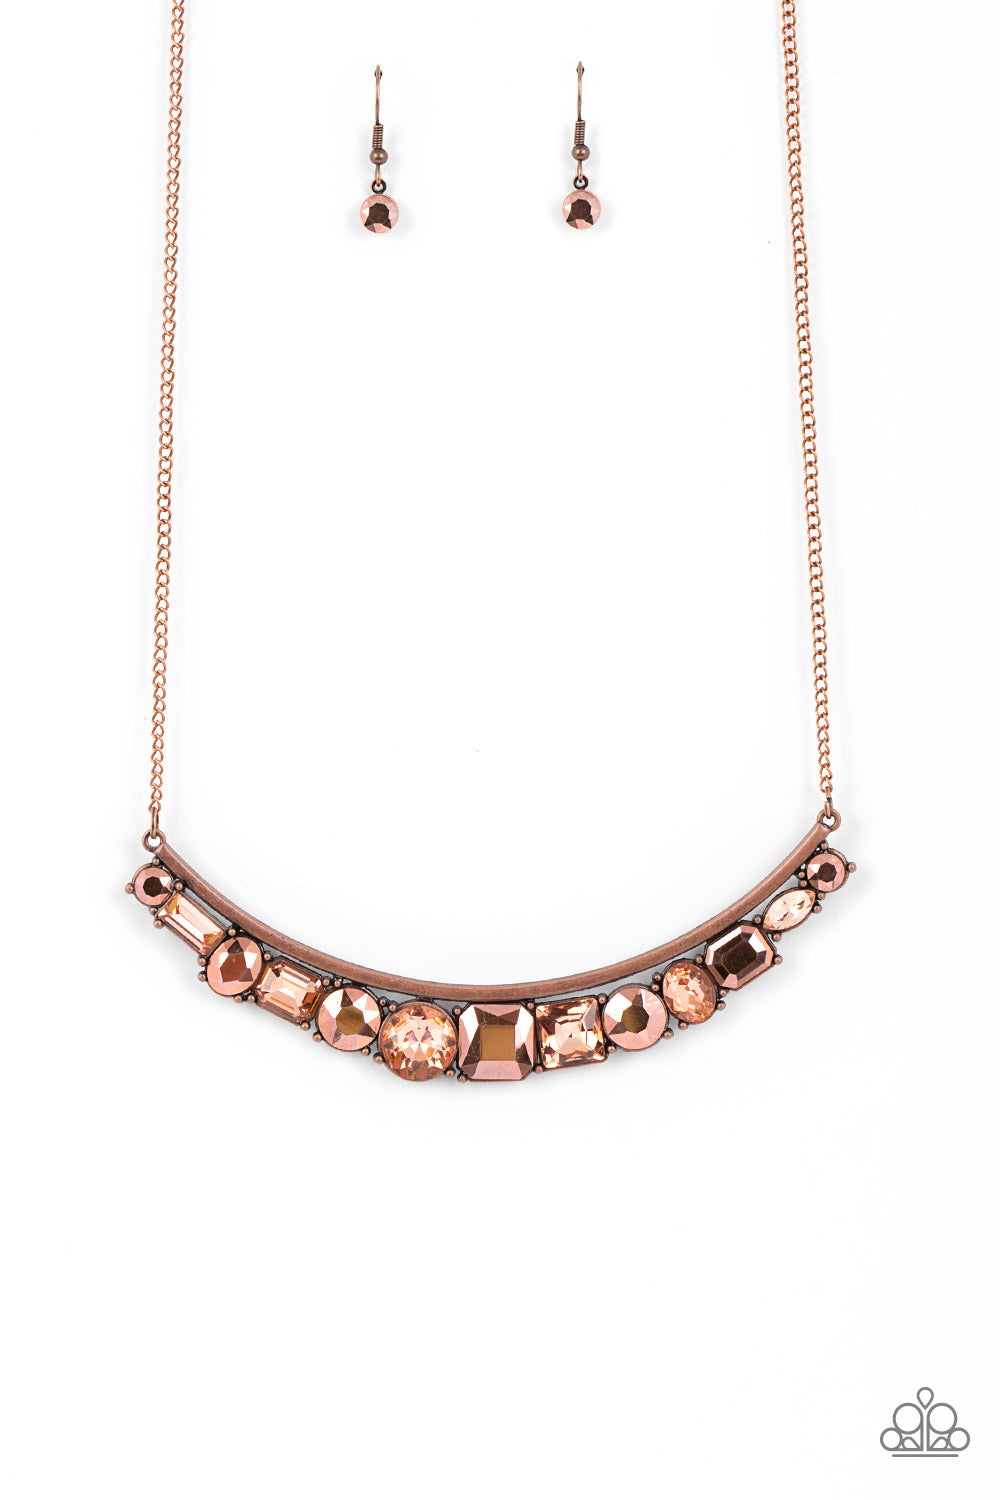 Paparazzi Necklaces - The Only Smoke-Show in Town - Copper